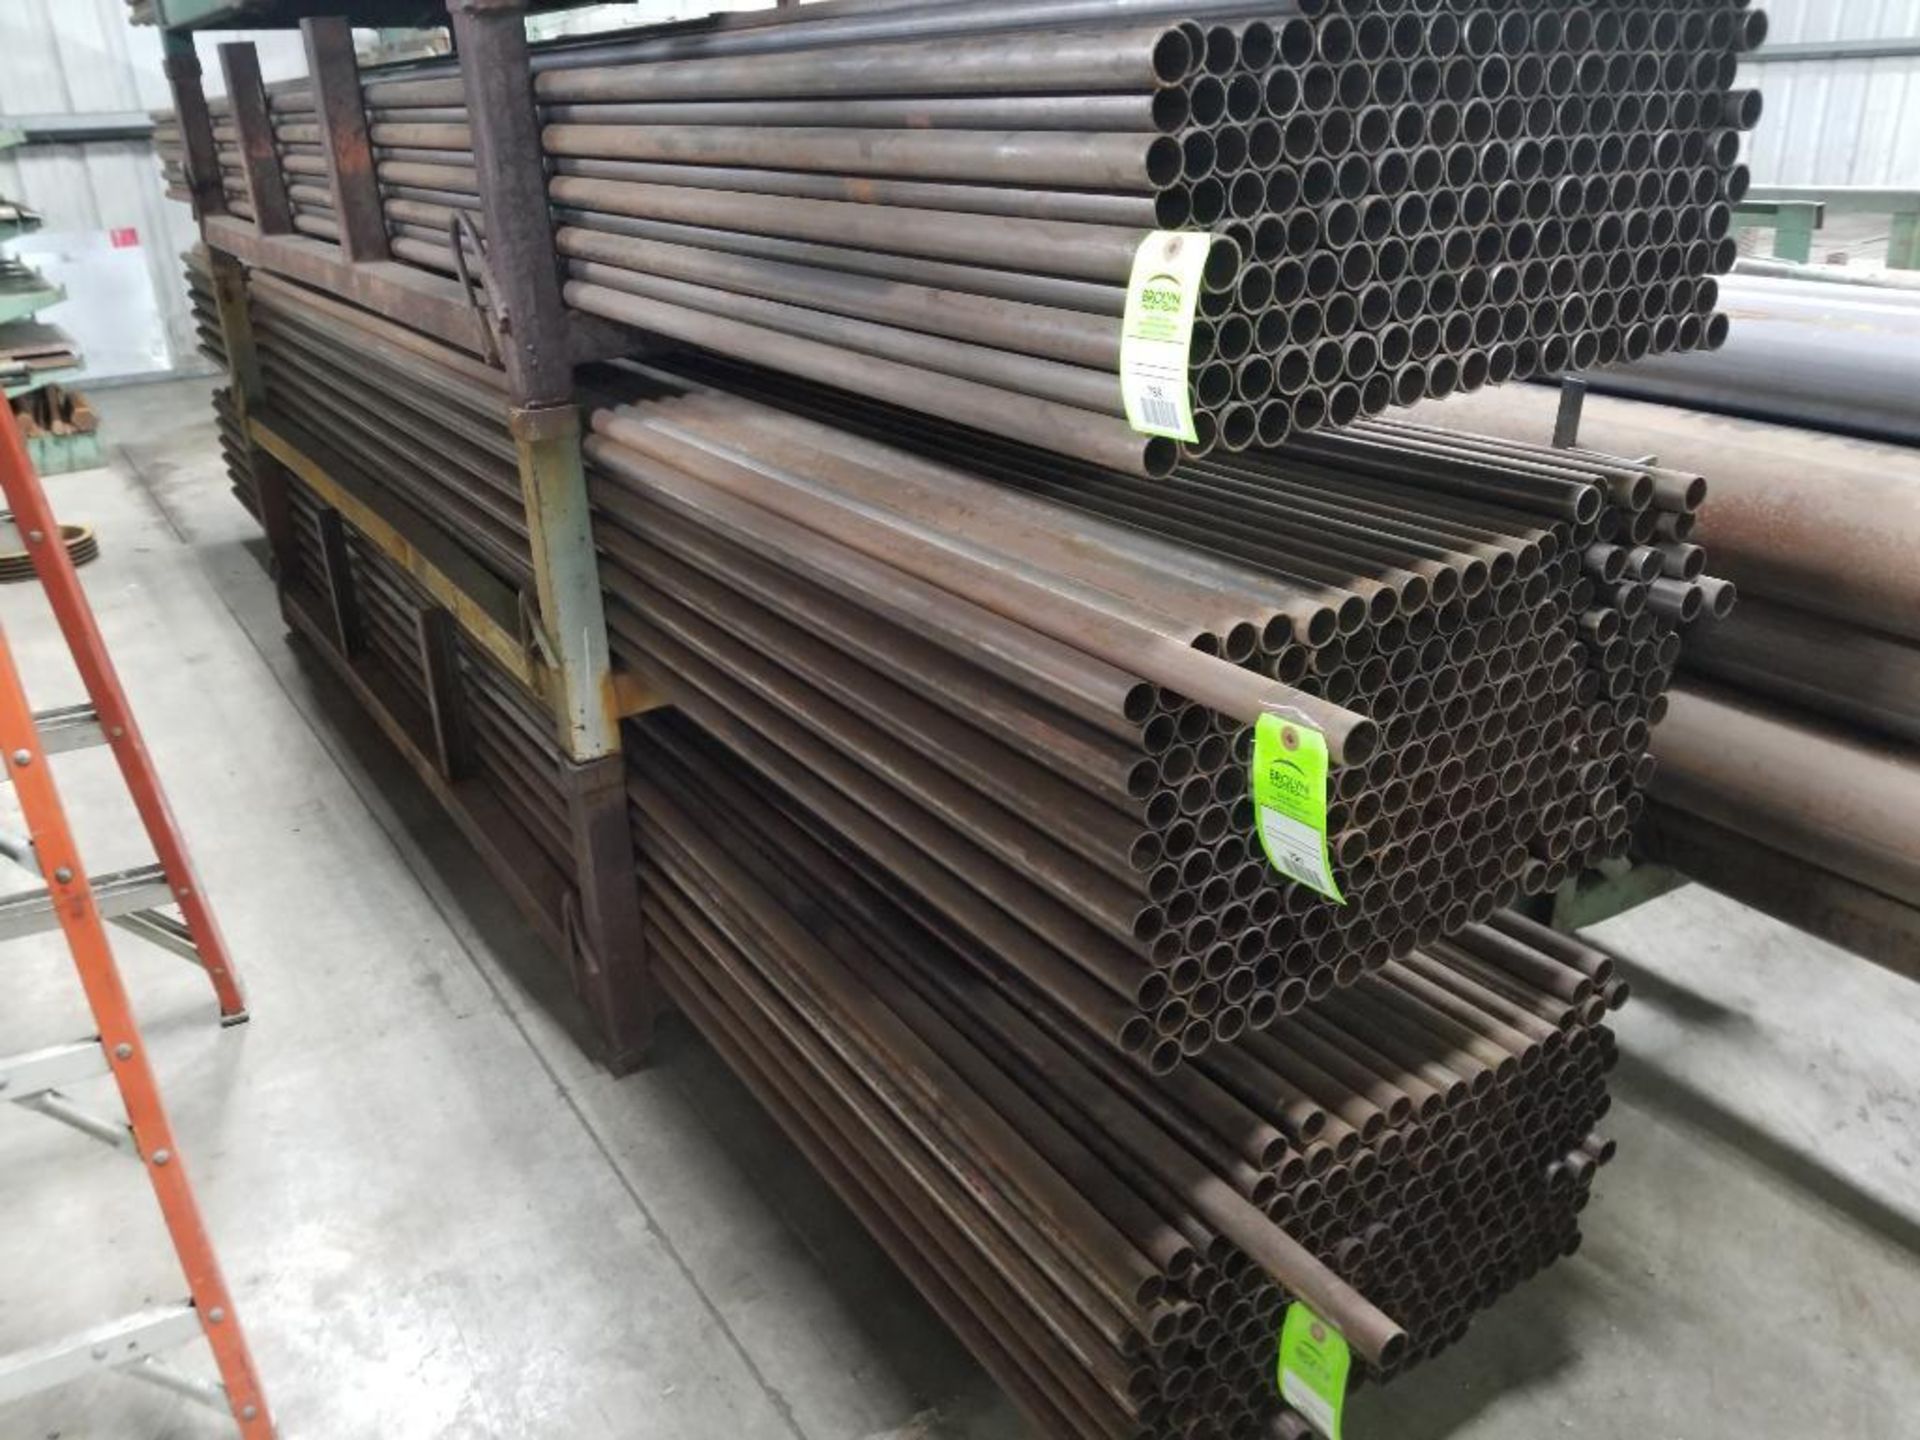 Large qty of steel tube stock as pictured in one section.